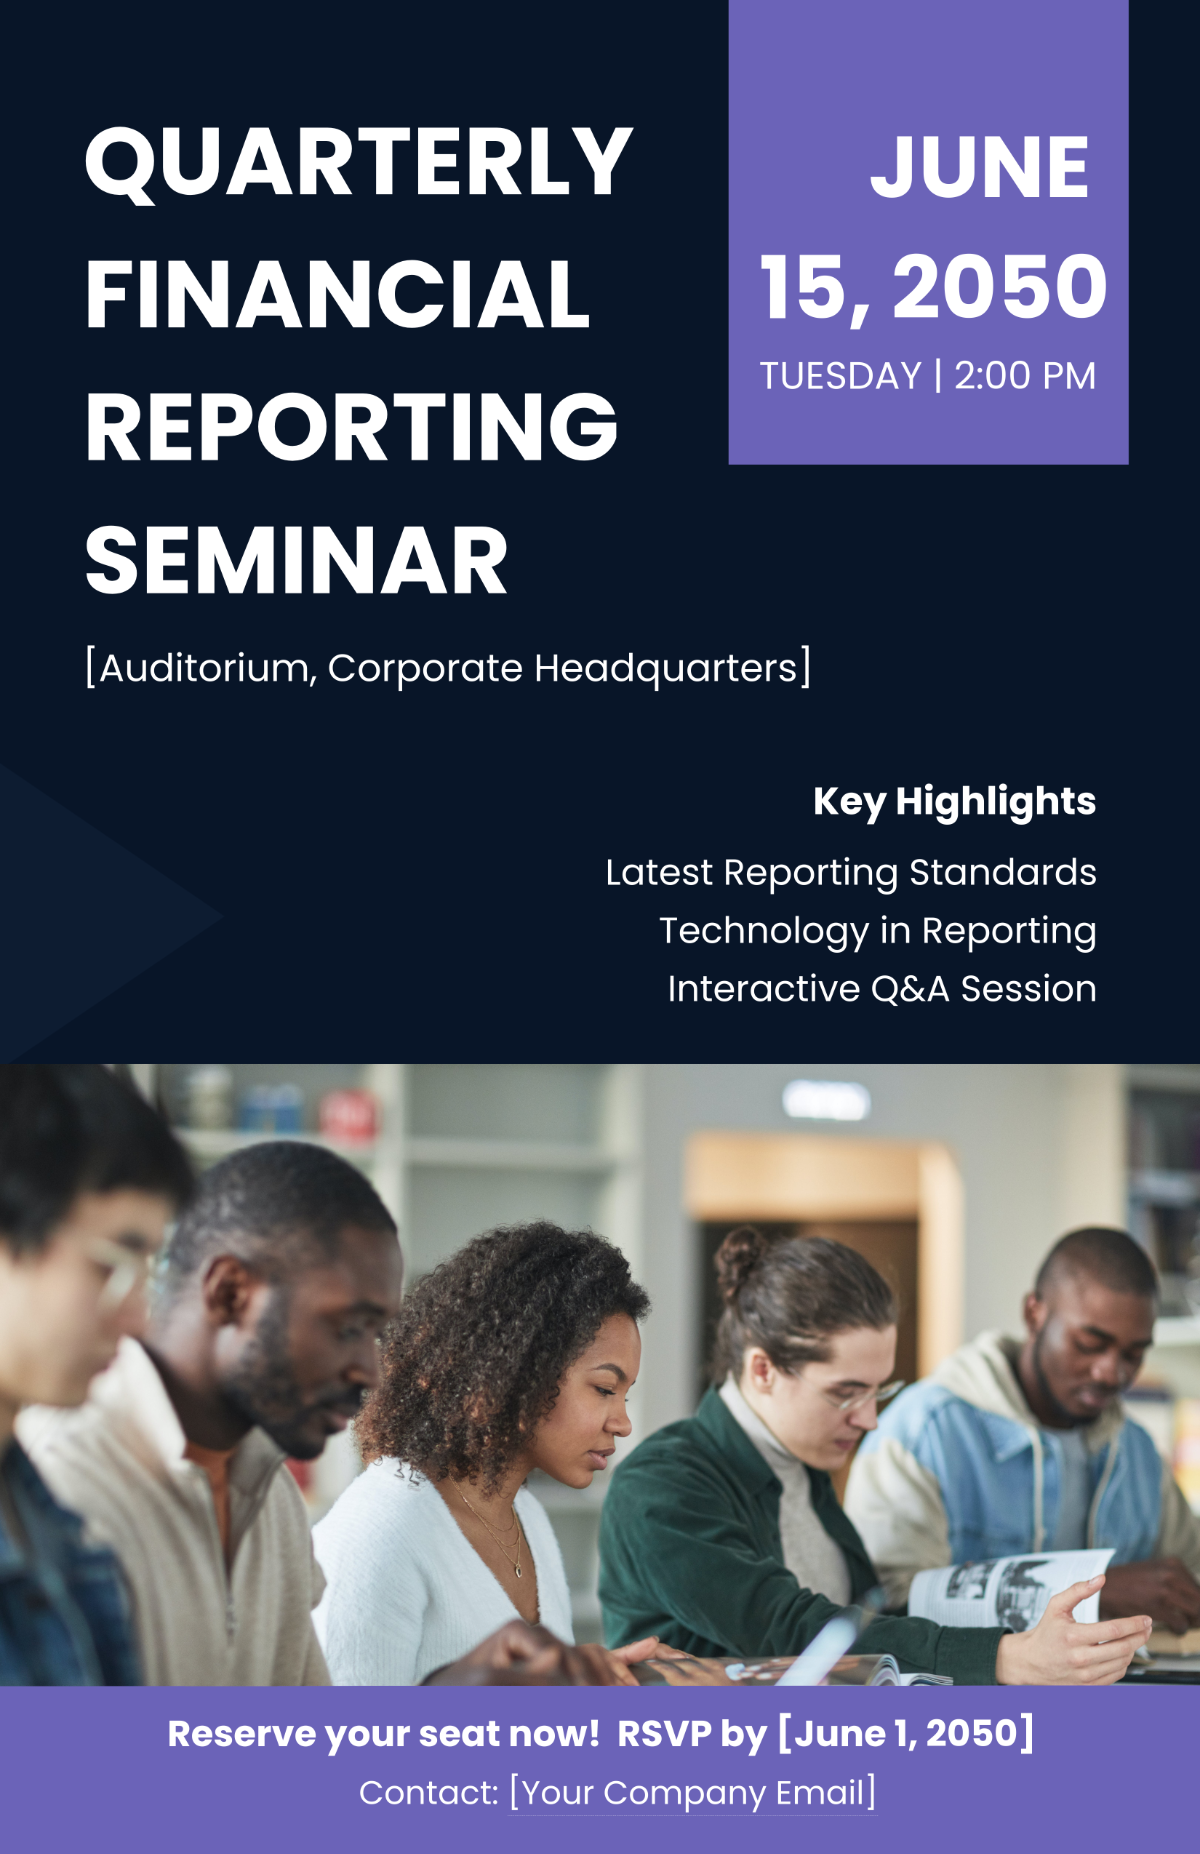 Free Quarterly Financial Reporting Seminar Poster Template